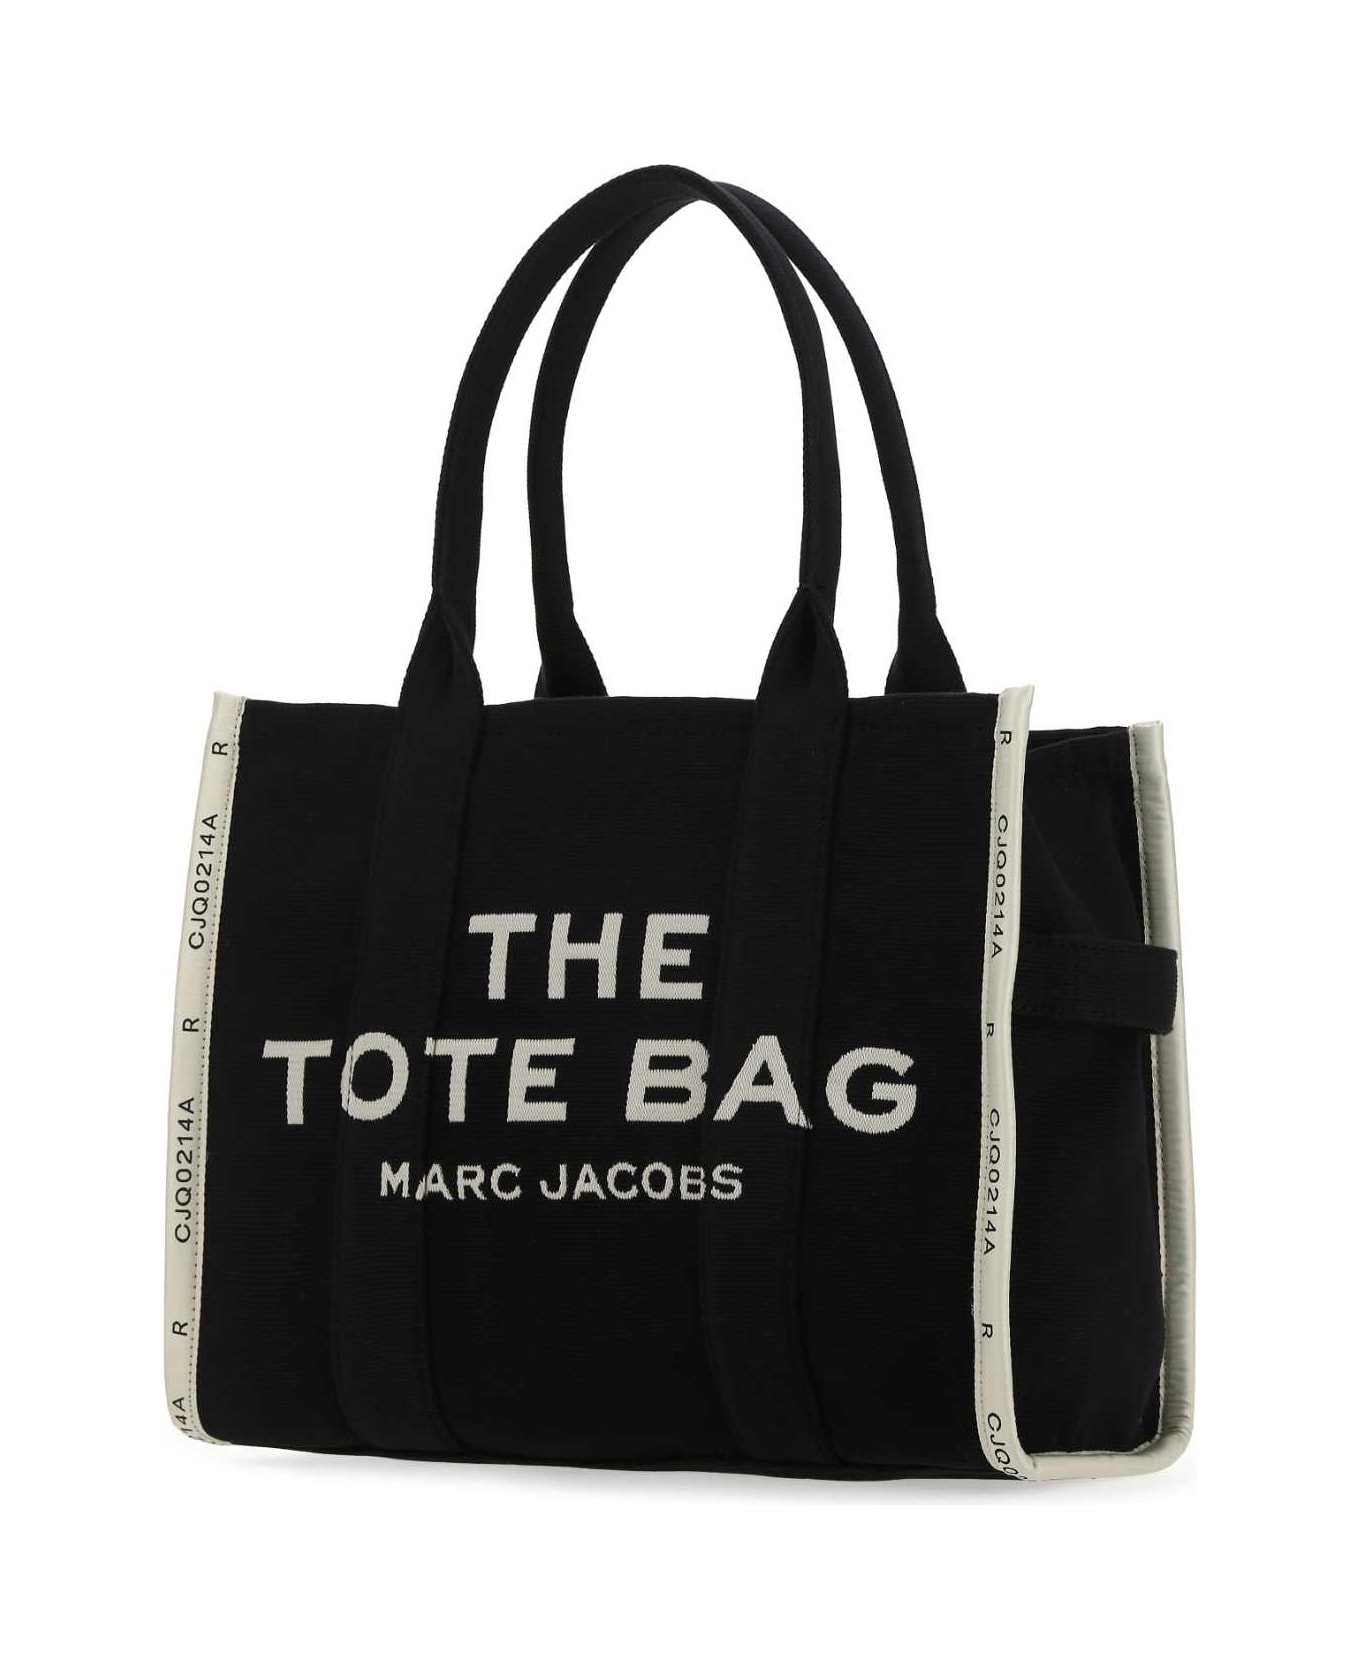 Marc Jacobs Black Canvas The Tote Shopping Bag - 001